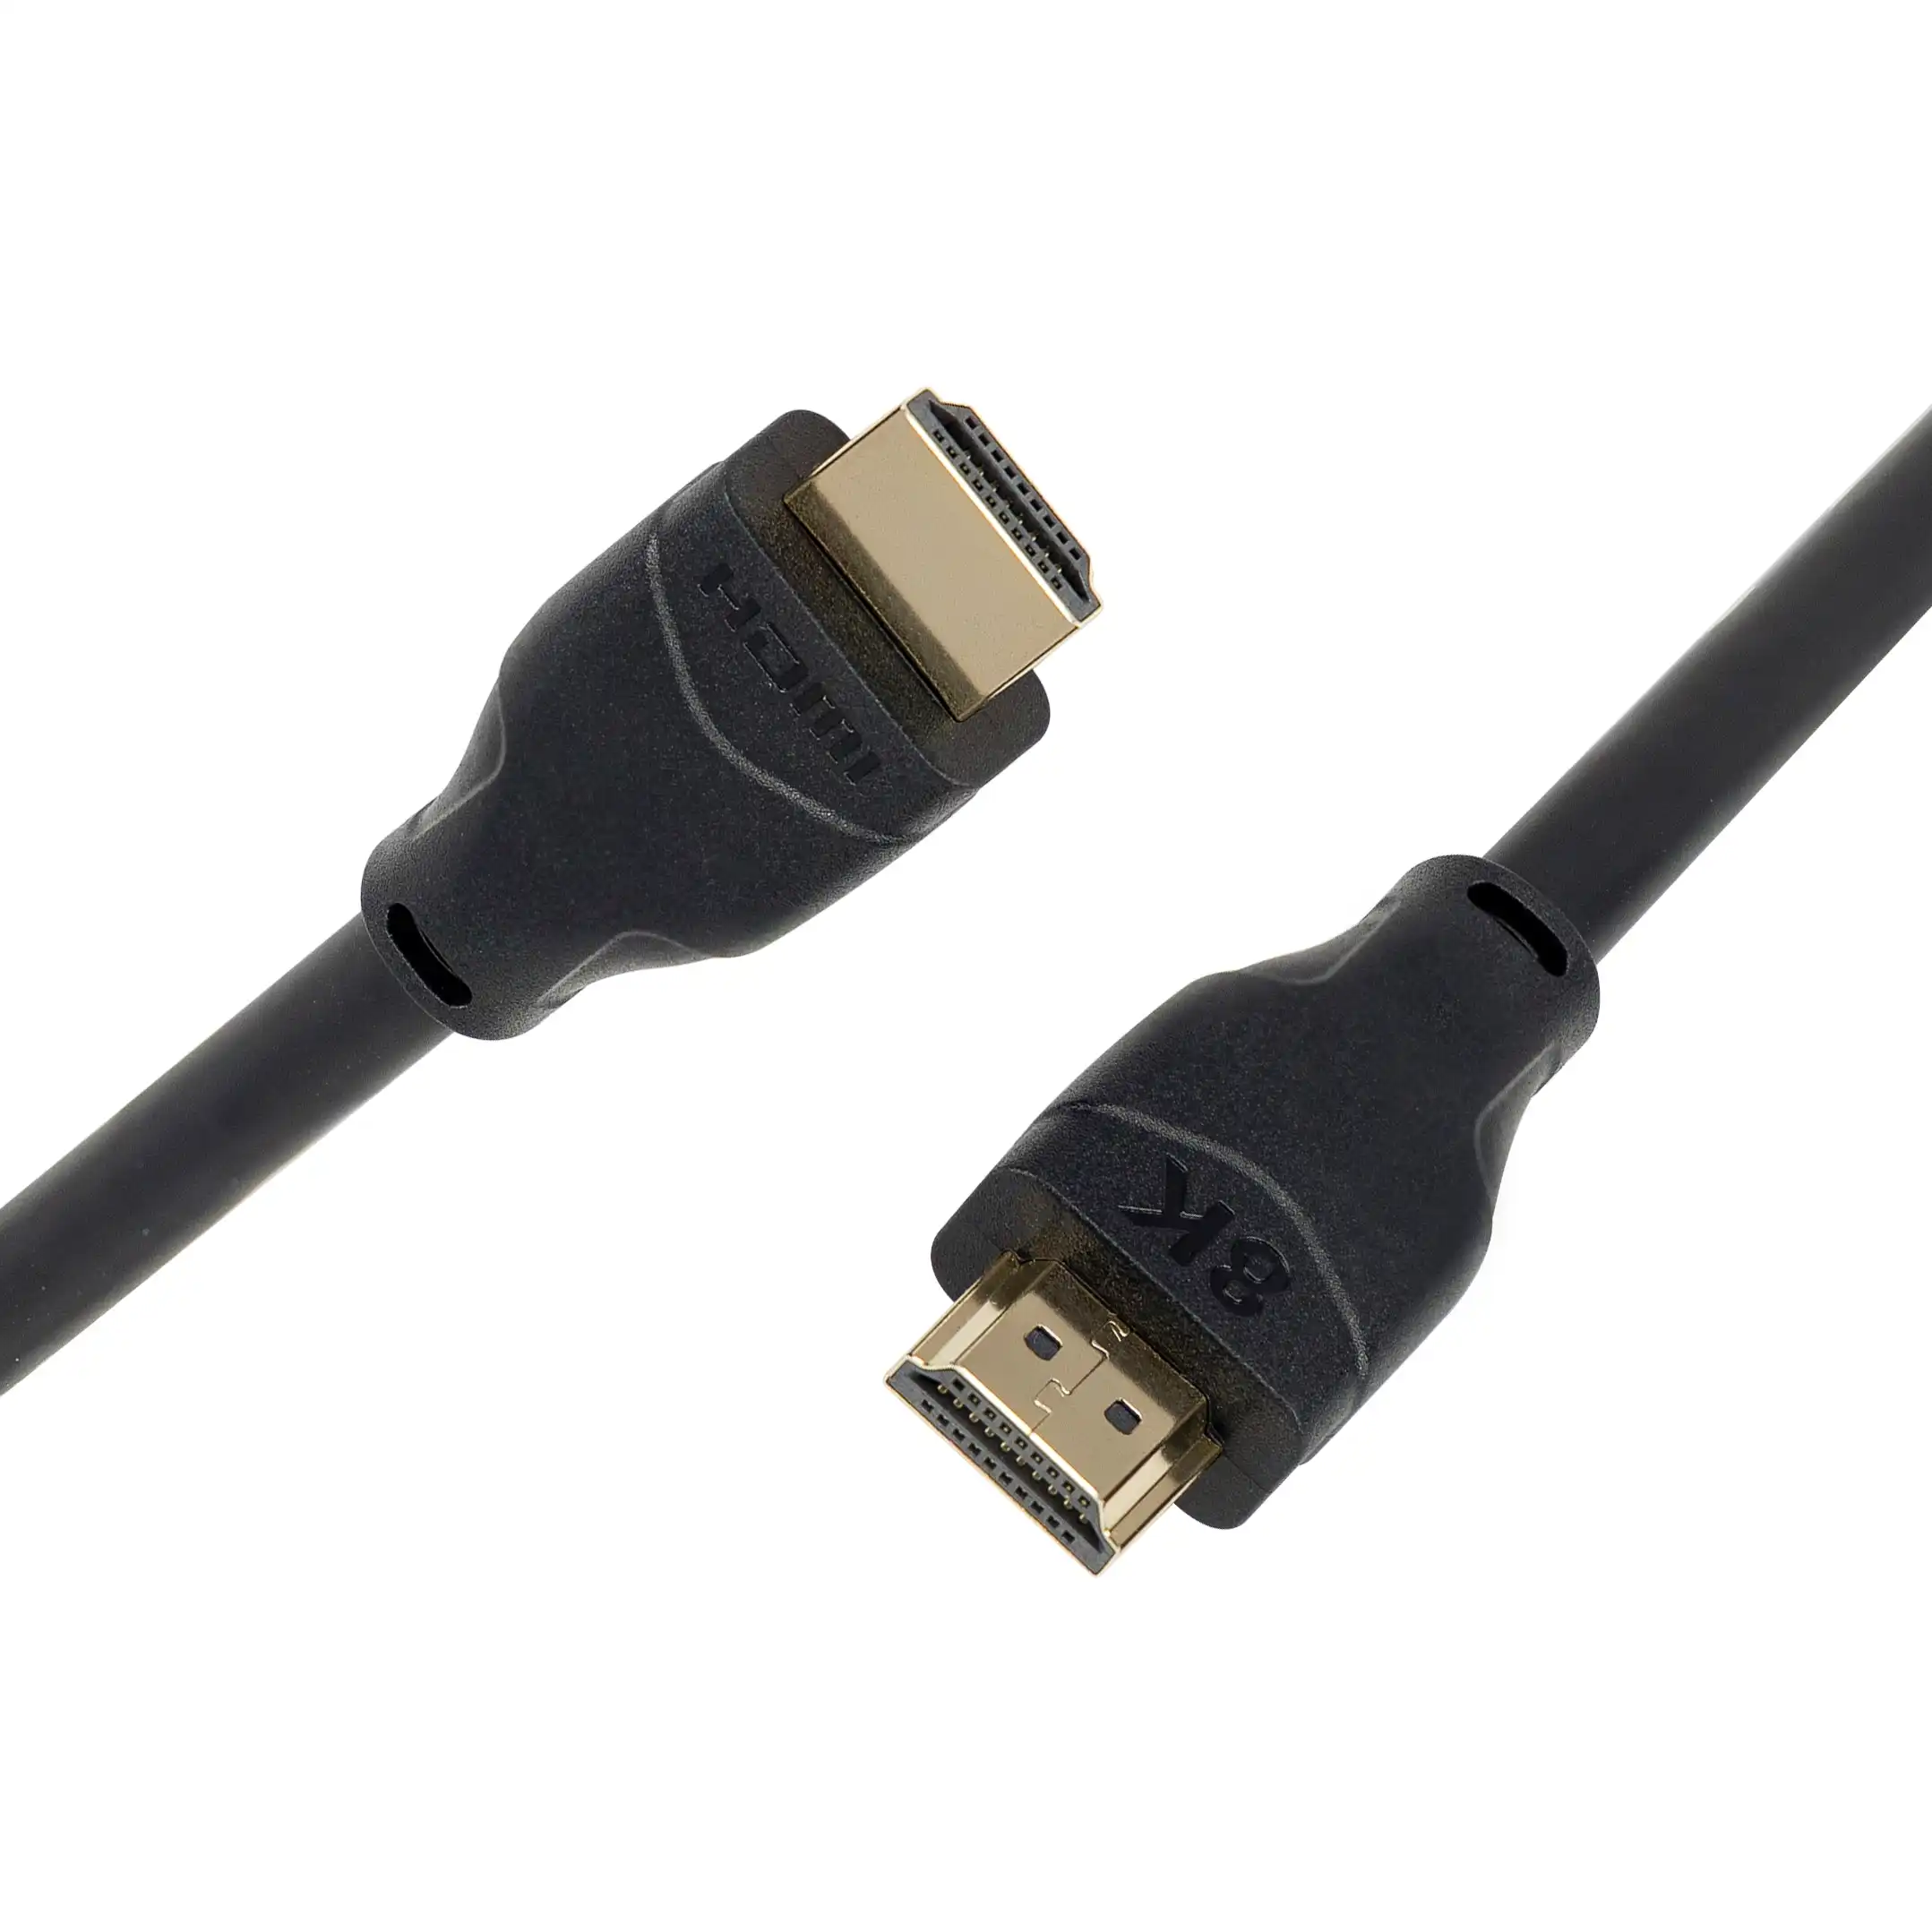 Cruxtec 3m Certified Ultra High Speed HDMI 2.1 Cable 48Gbps ( 8K